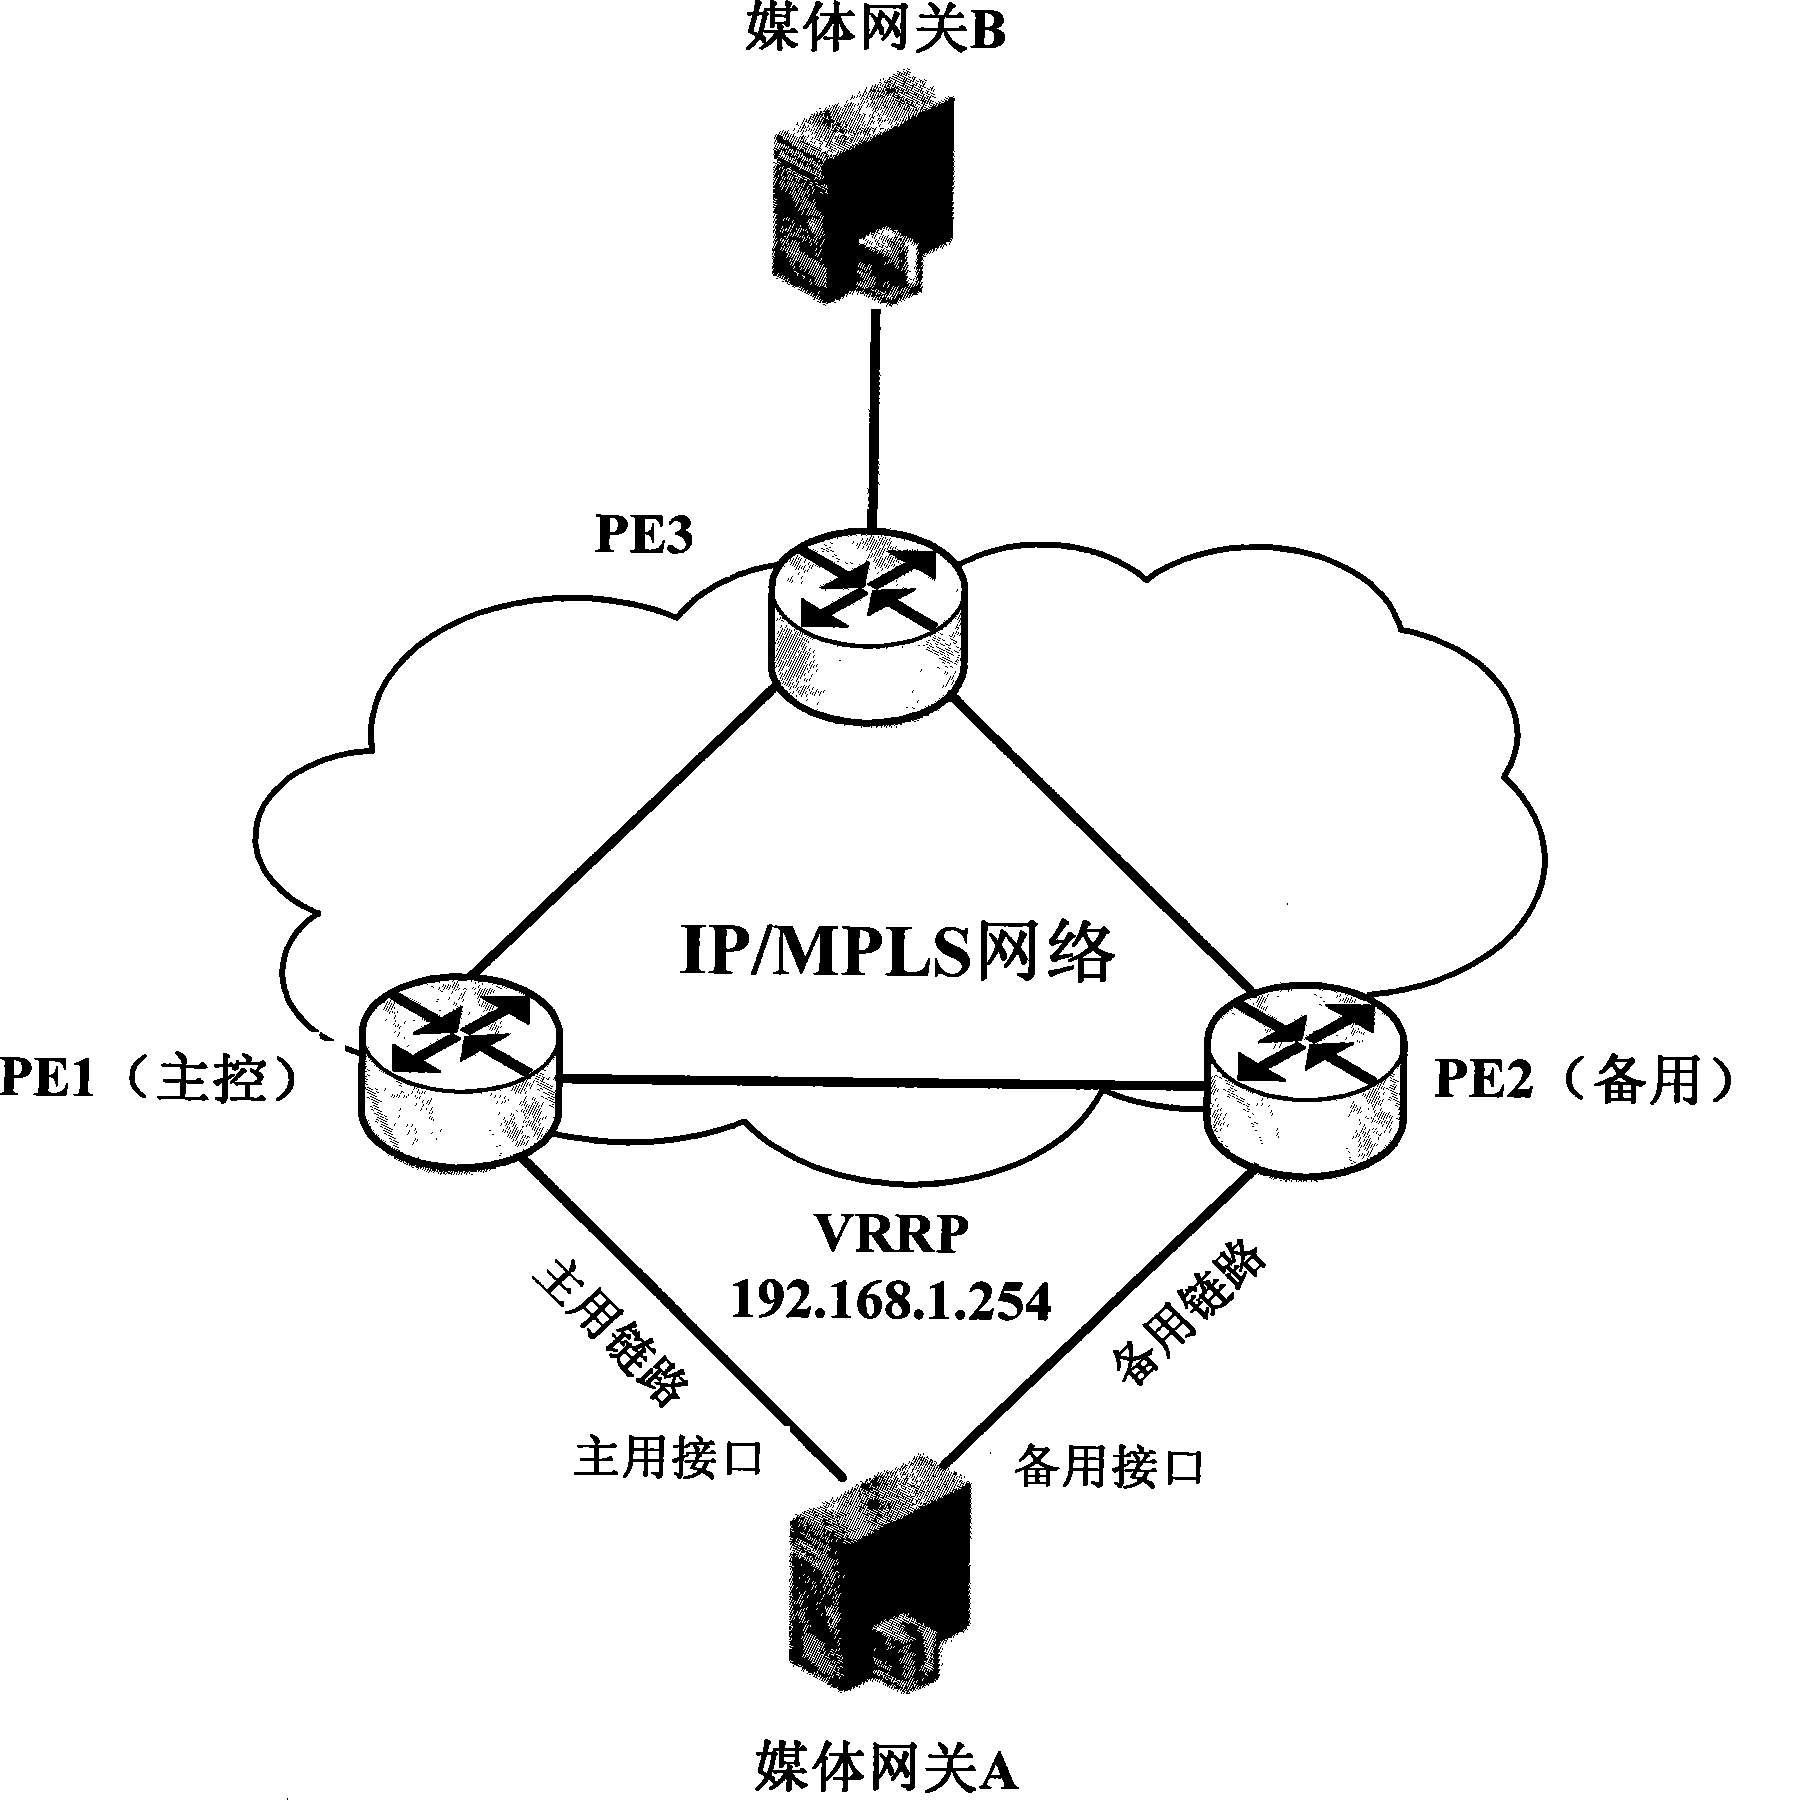 Primary/standby route equipment switching method and route equipment